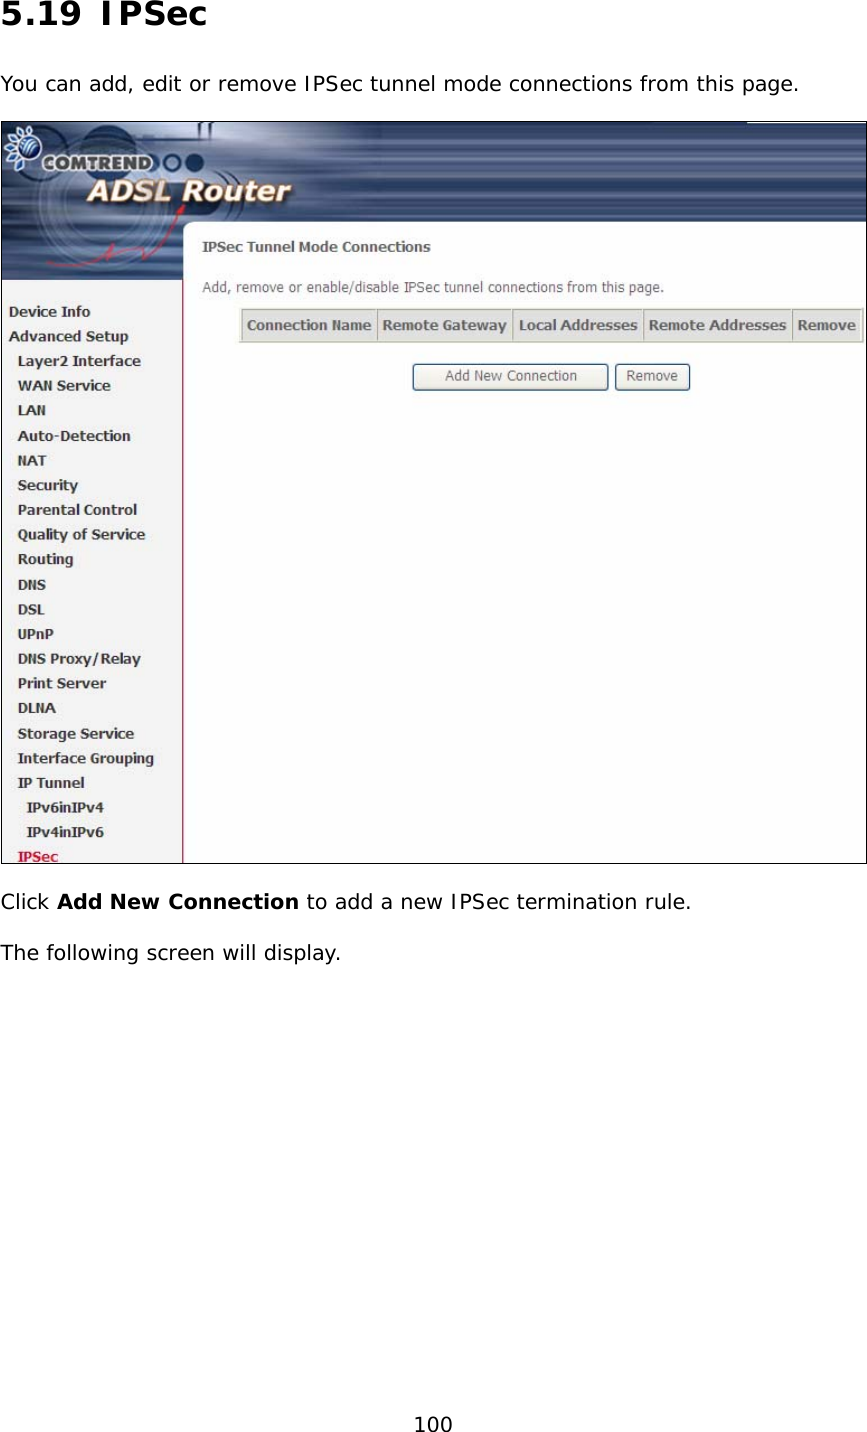  100 5.19 IPSec You can add, edit or remove IPSec tunnel mode connections from this page.    Click Add New Connection to add a new IPSec termination rule.  The following screen will display.  